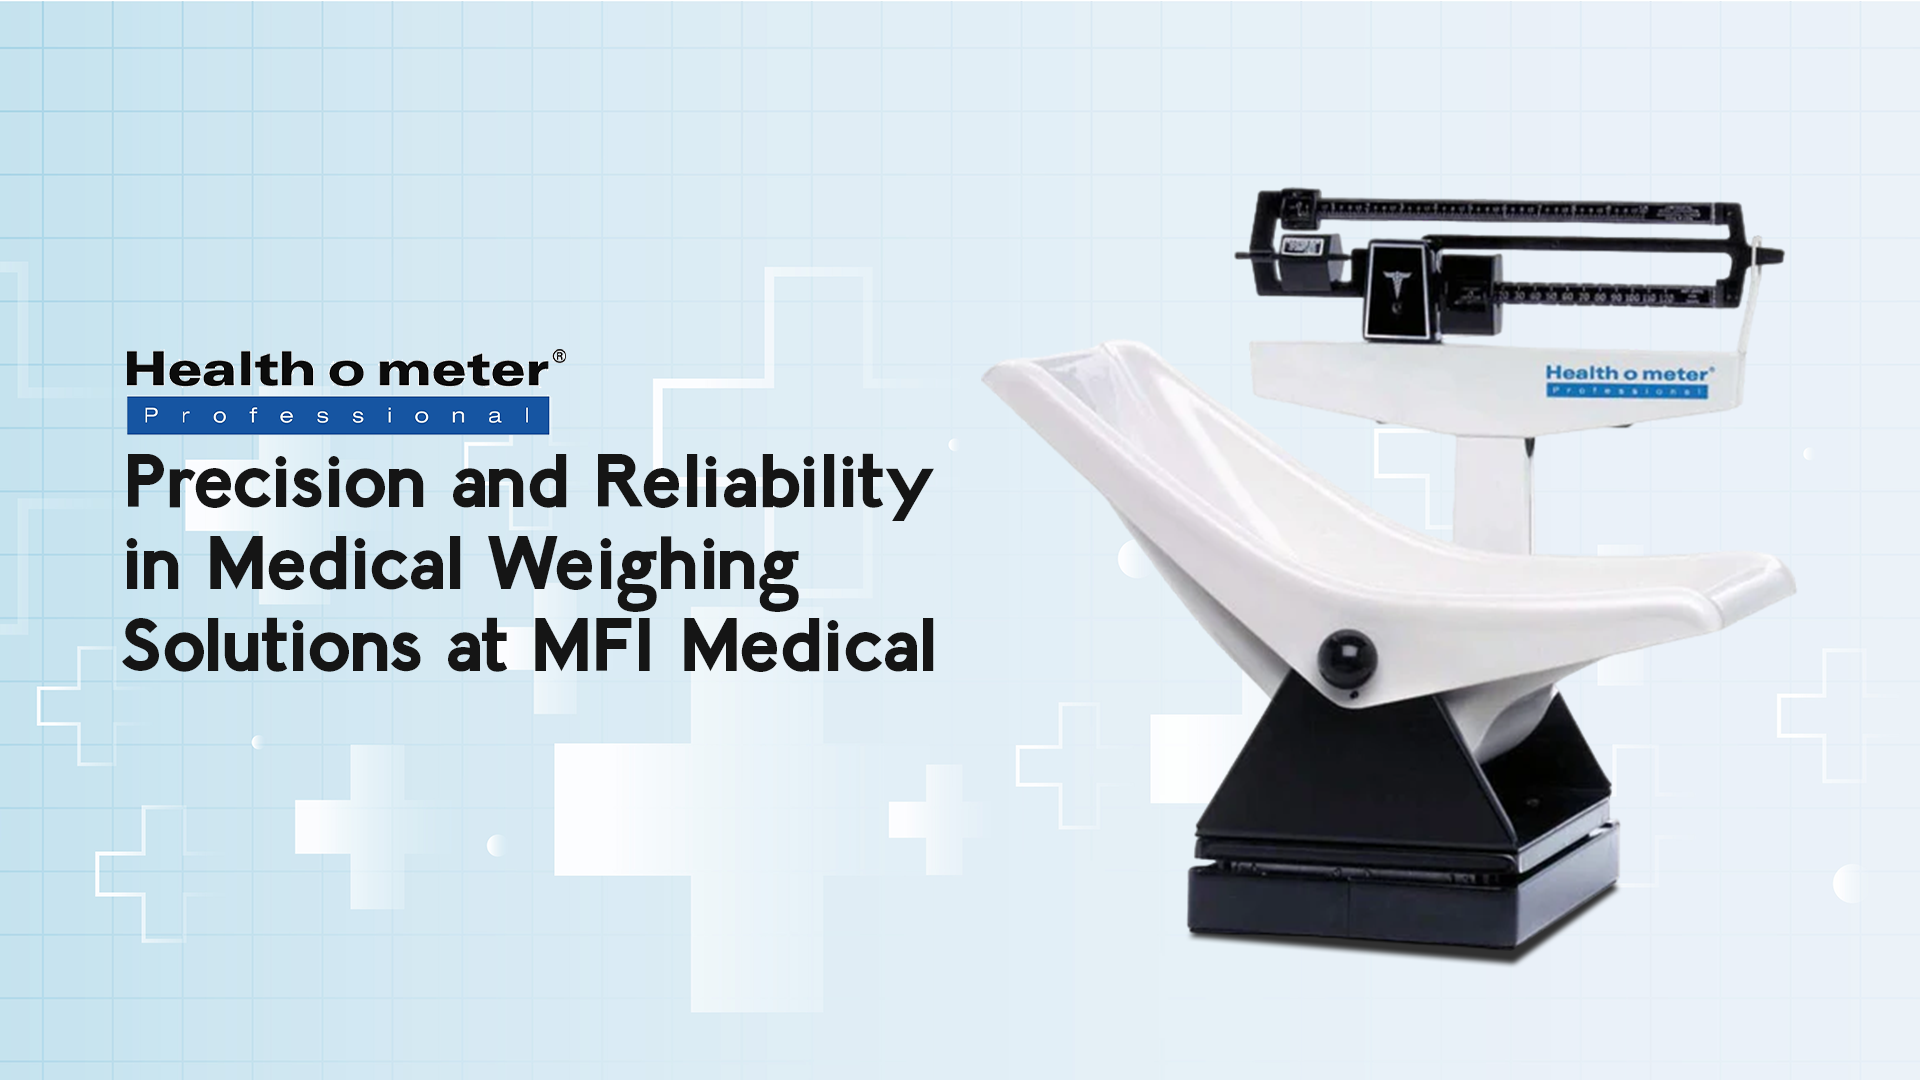 Health o meter in Medical Weighing Solutions At MFI Medical